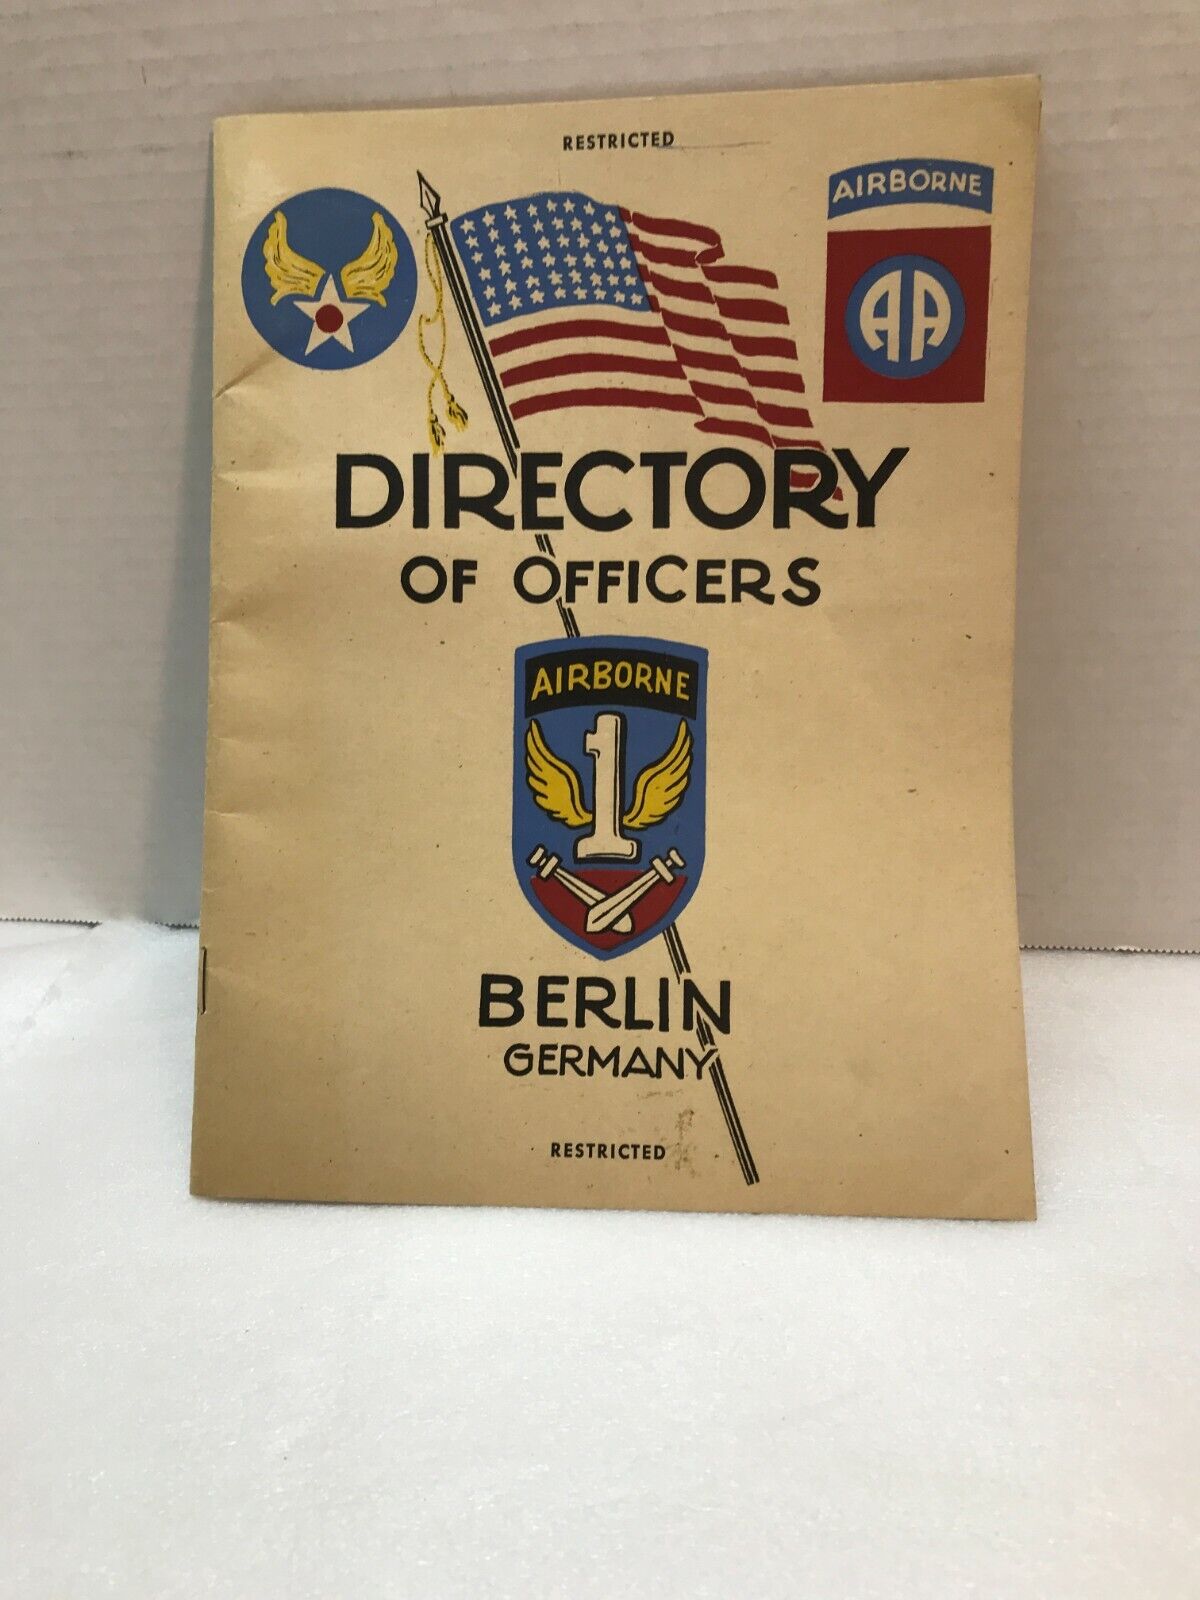 DIRECTORY OF OFFICERS OF AIRBORNE 1 BERLIN GERMANY